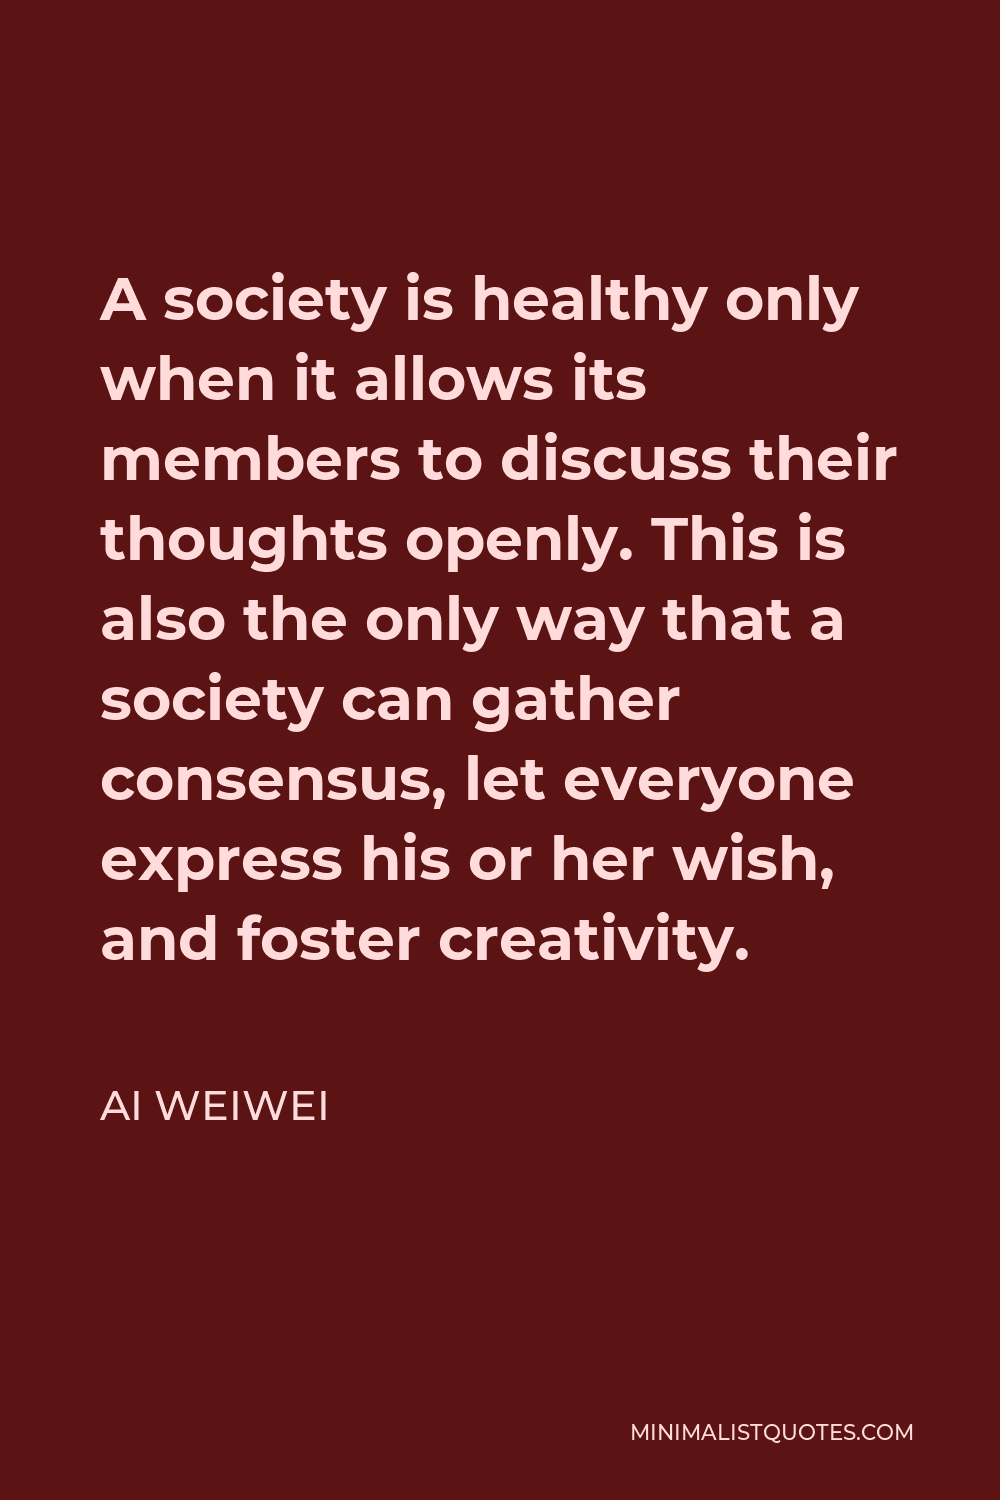 Ai Weiwei Quote - A society is healthy only when it allows its members to discuss their thoughts openly. This is also the only way that a society can gather consensus, let everyone express his or her wish, and foster creativity.